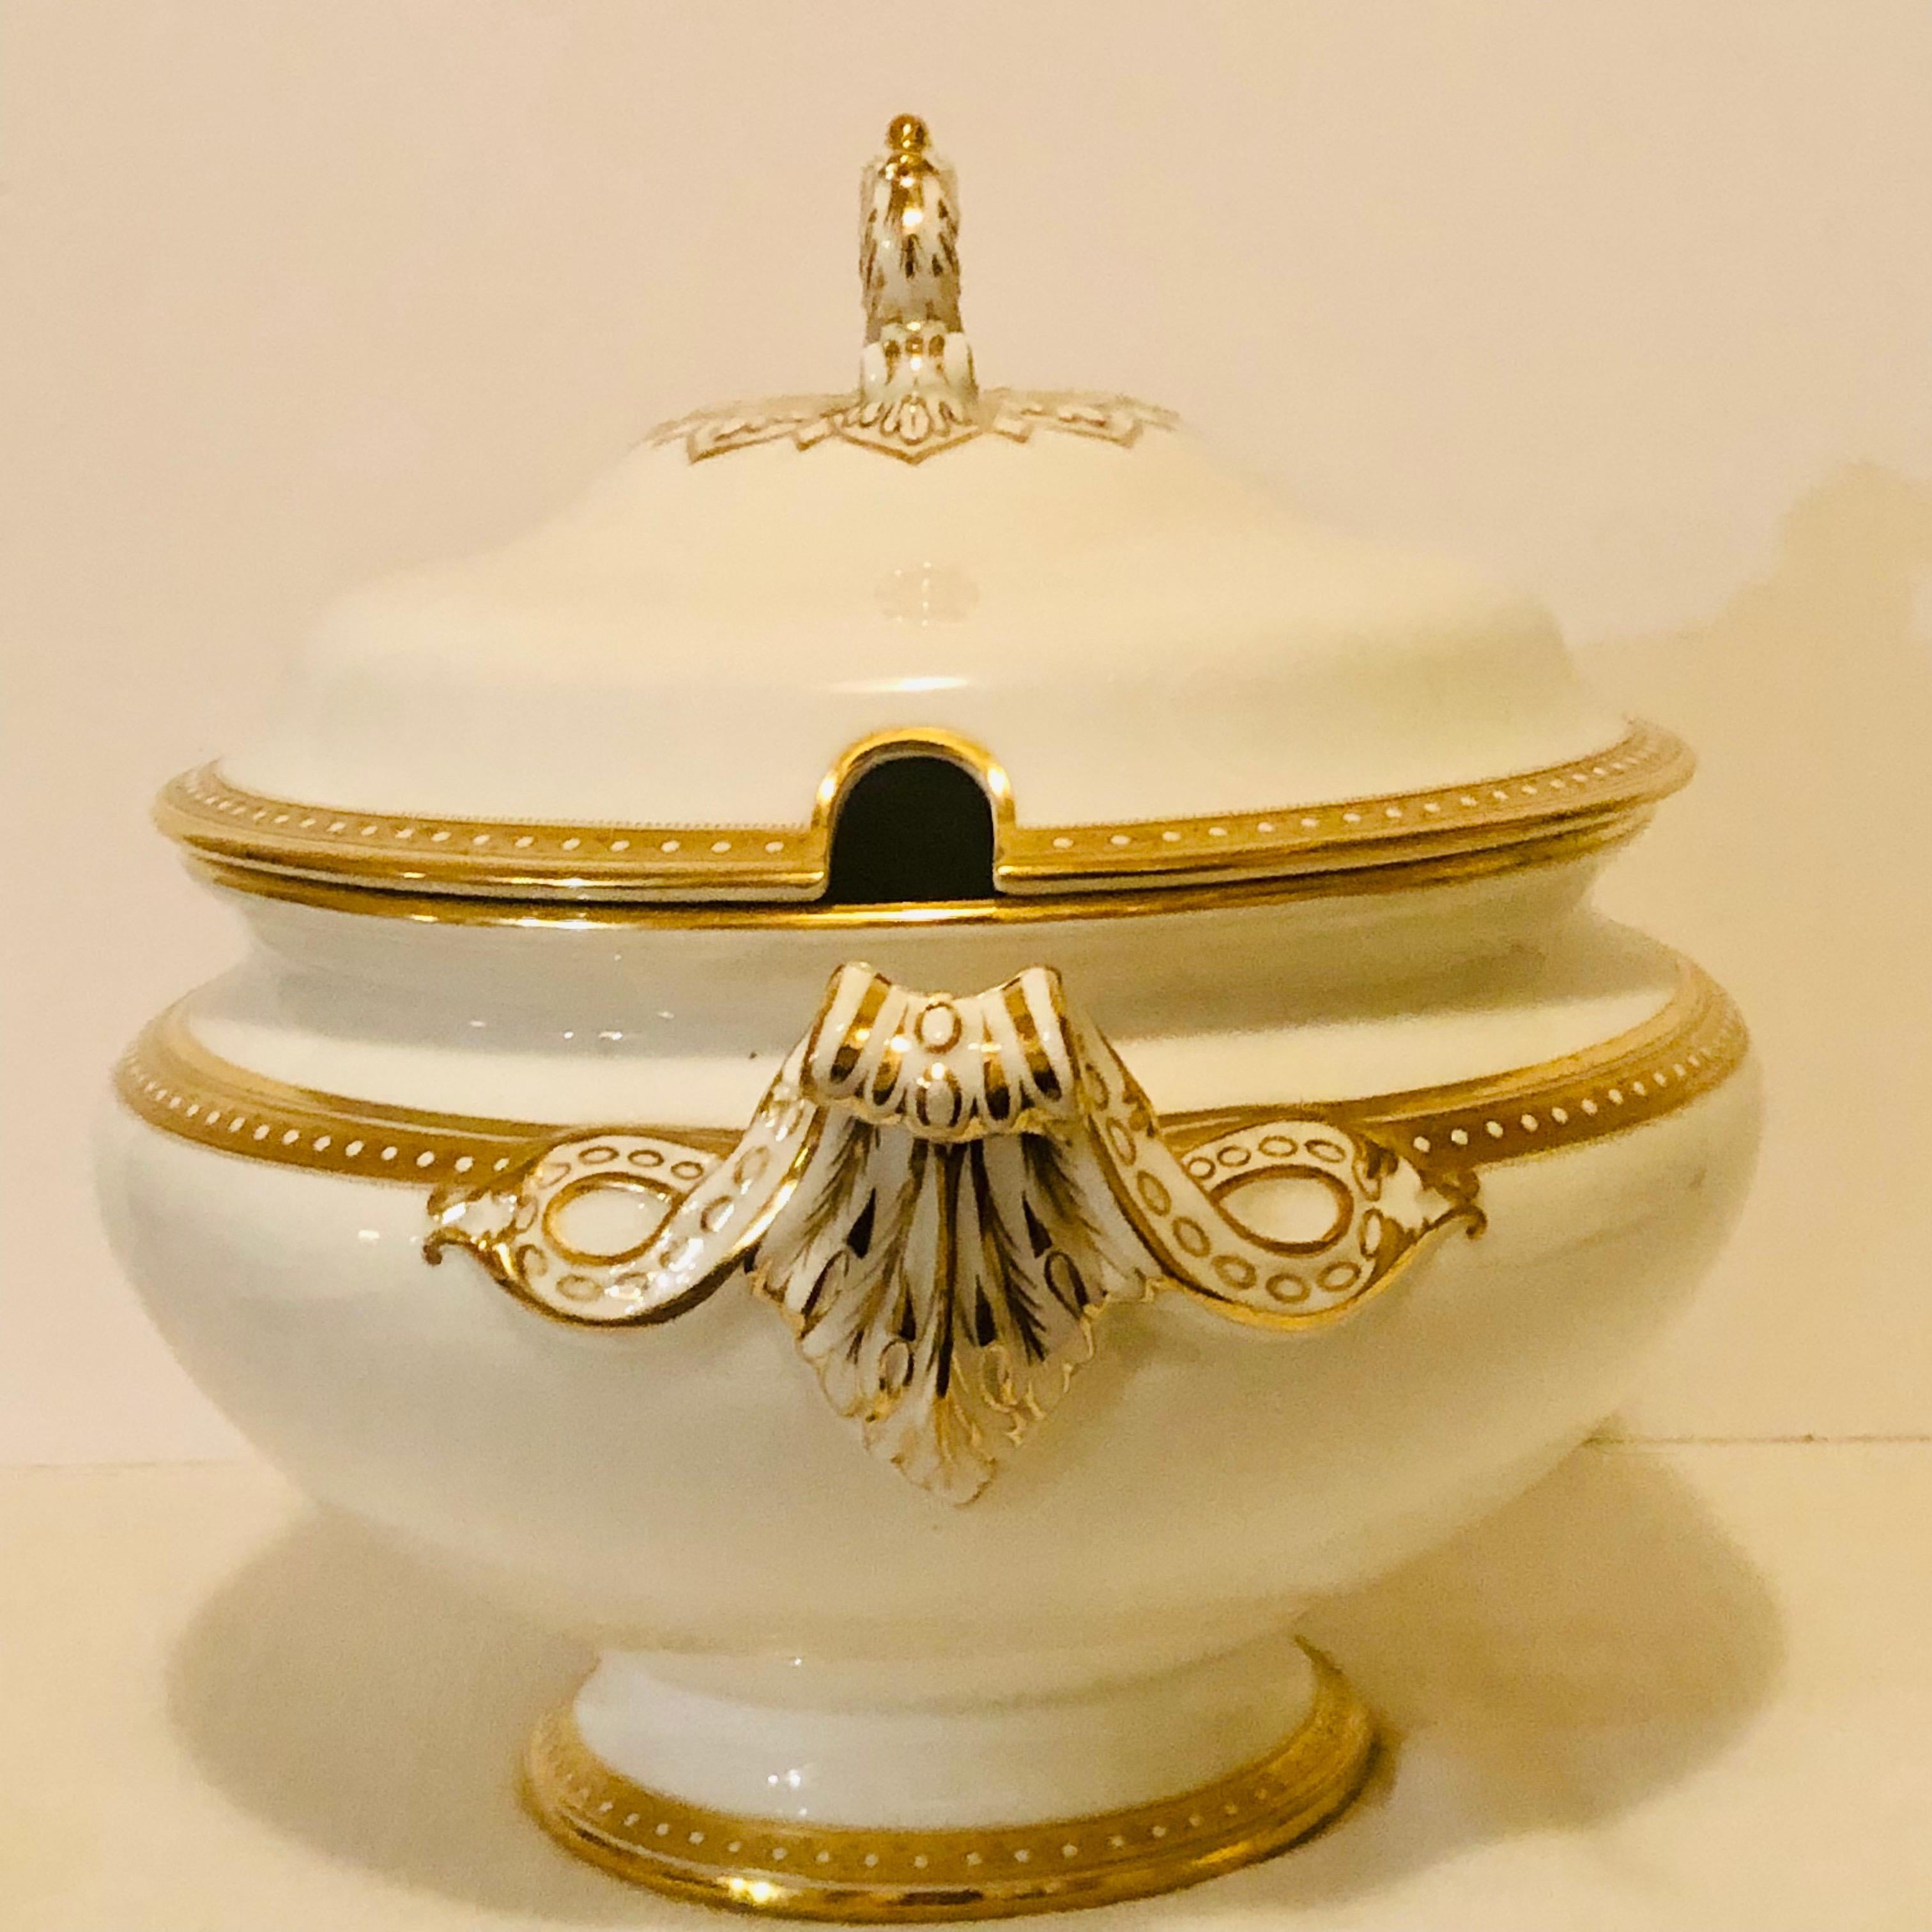 English Copeland Spode Soup Tureen with Gold Border and White Jeweling Made for T. Goode